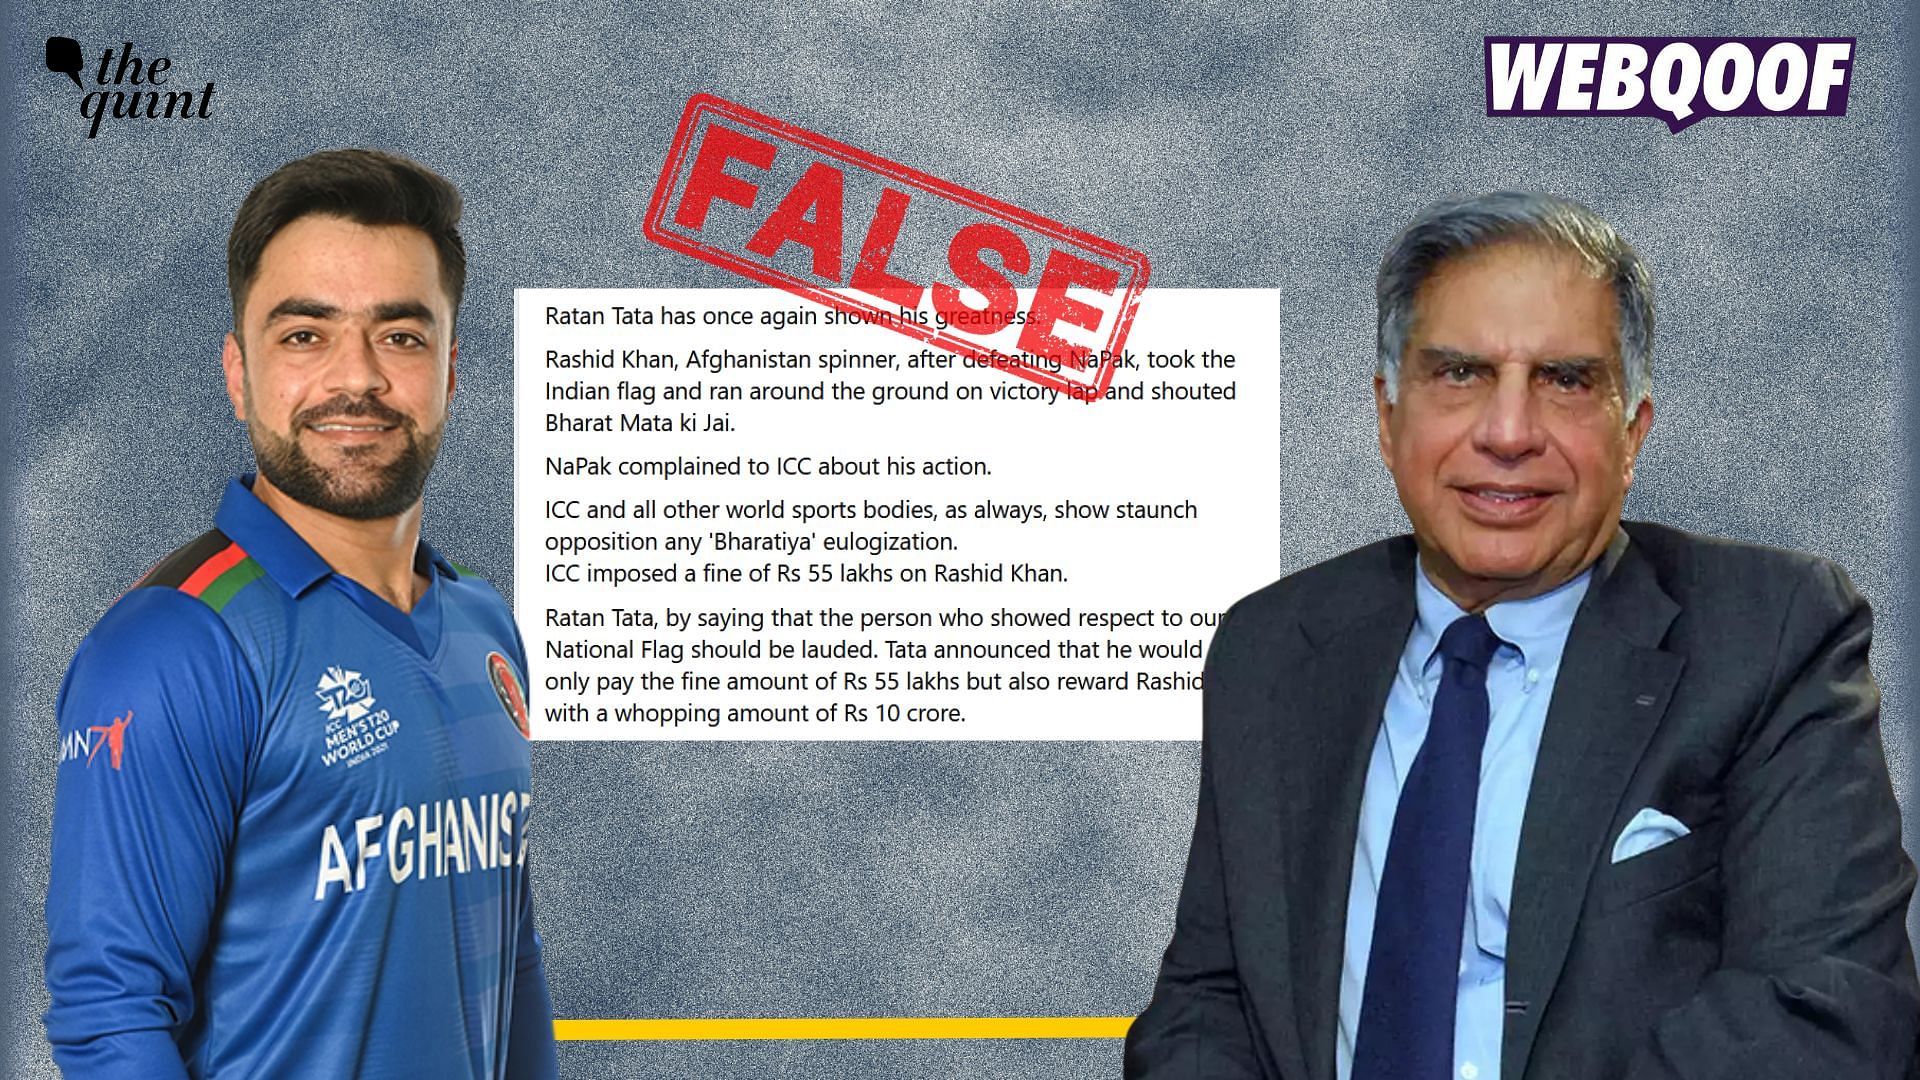 <div class="paragraphs"><p>Fact-Check: Ratan Tata did not declare any reward to cricketer Rashid Khan for waving the Indian flag after Afghanistan’s victory against Pakistan.</p></div>